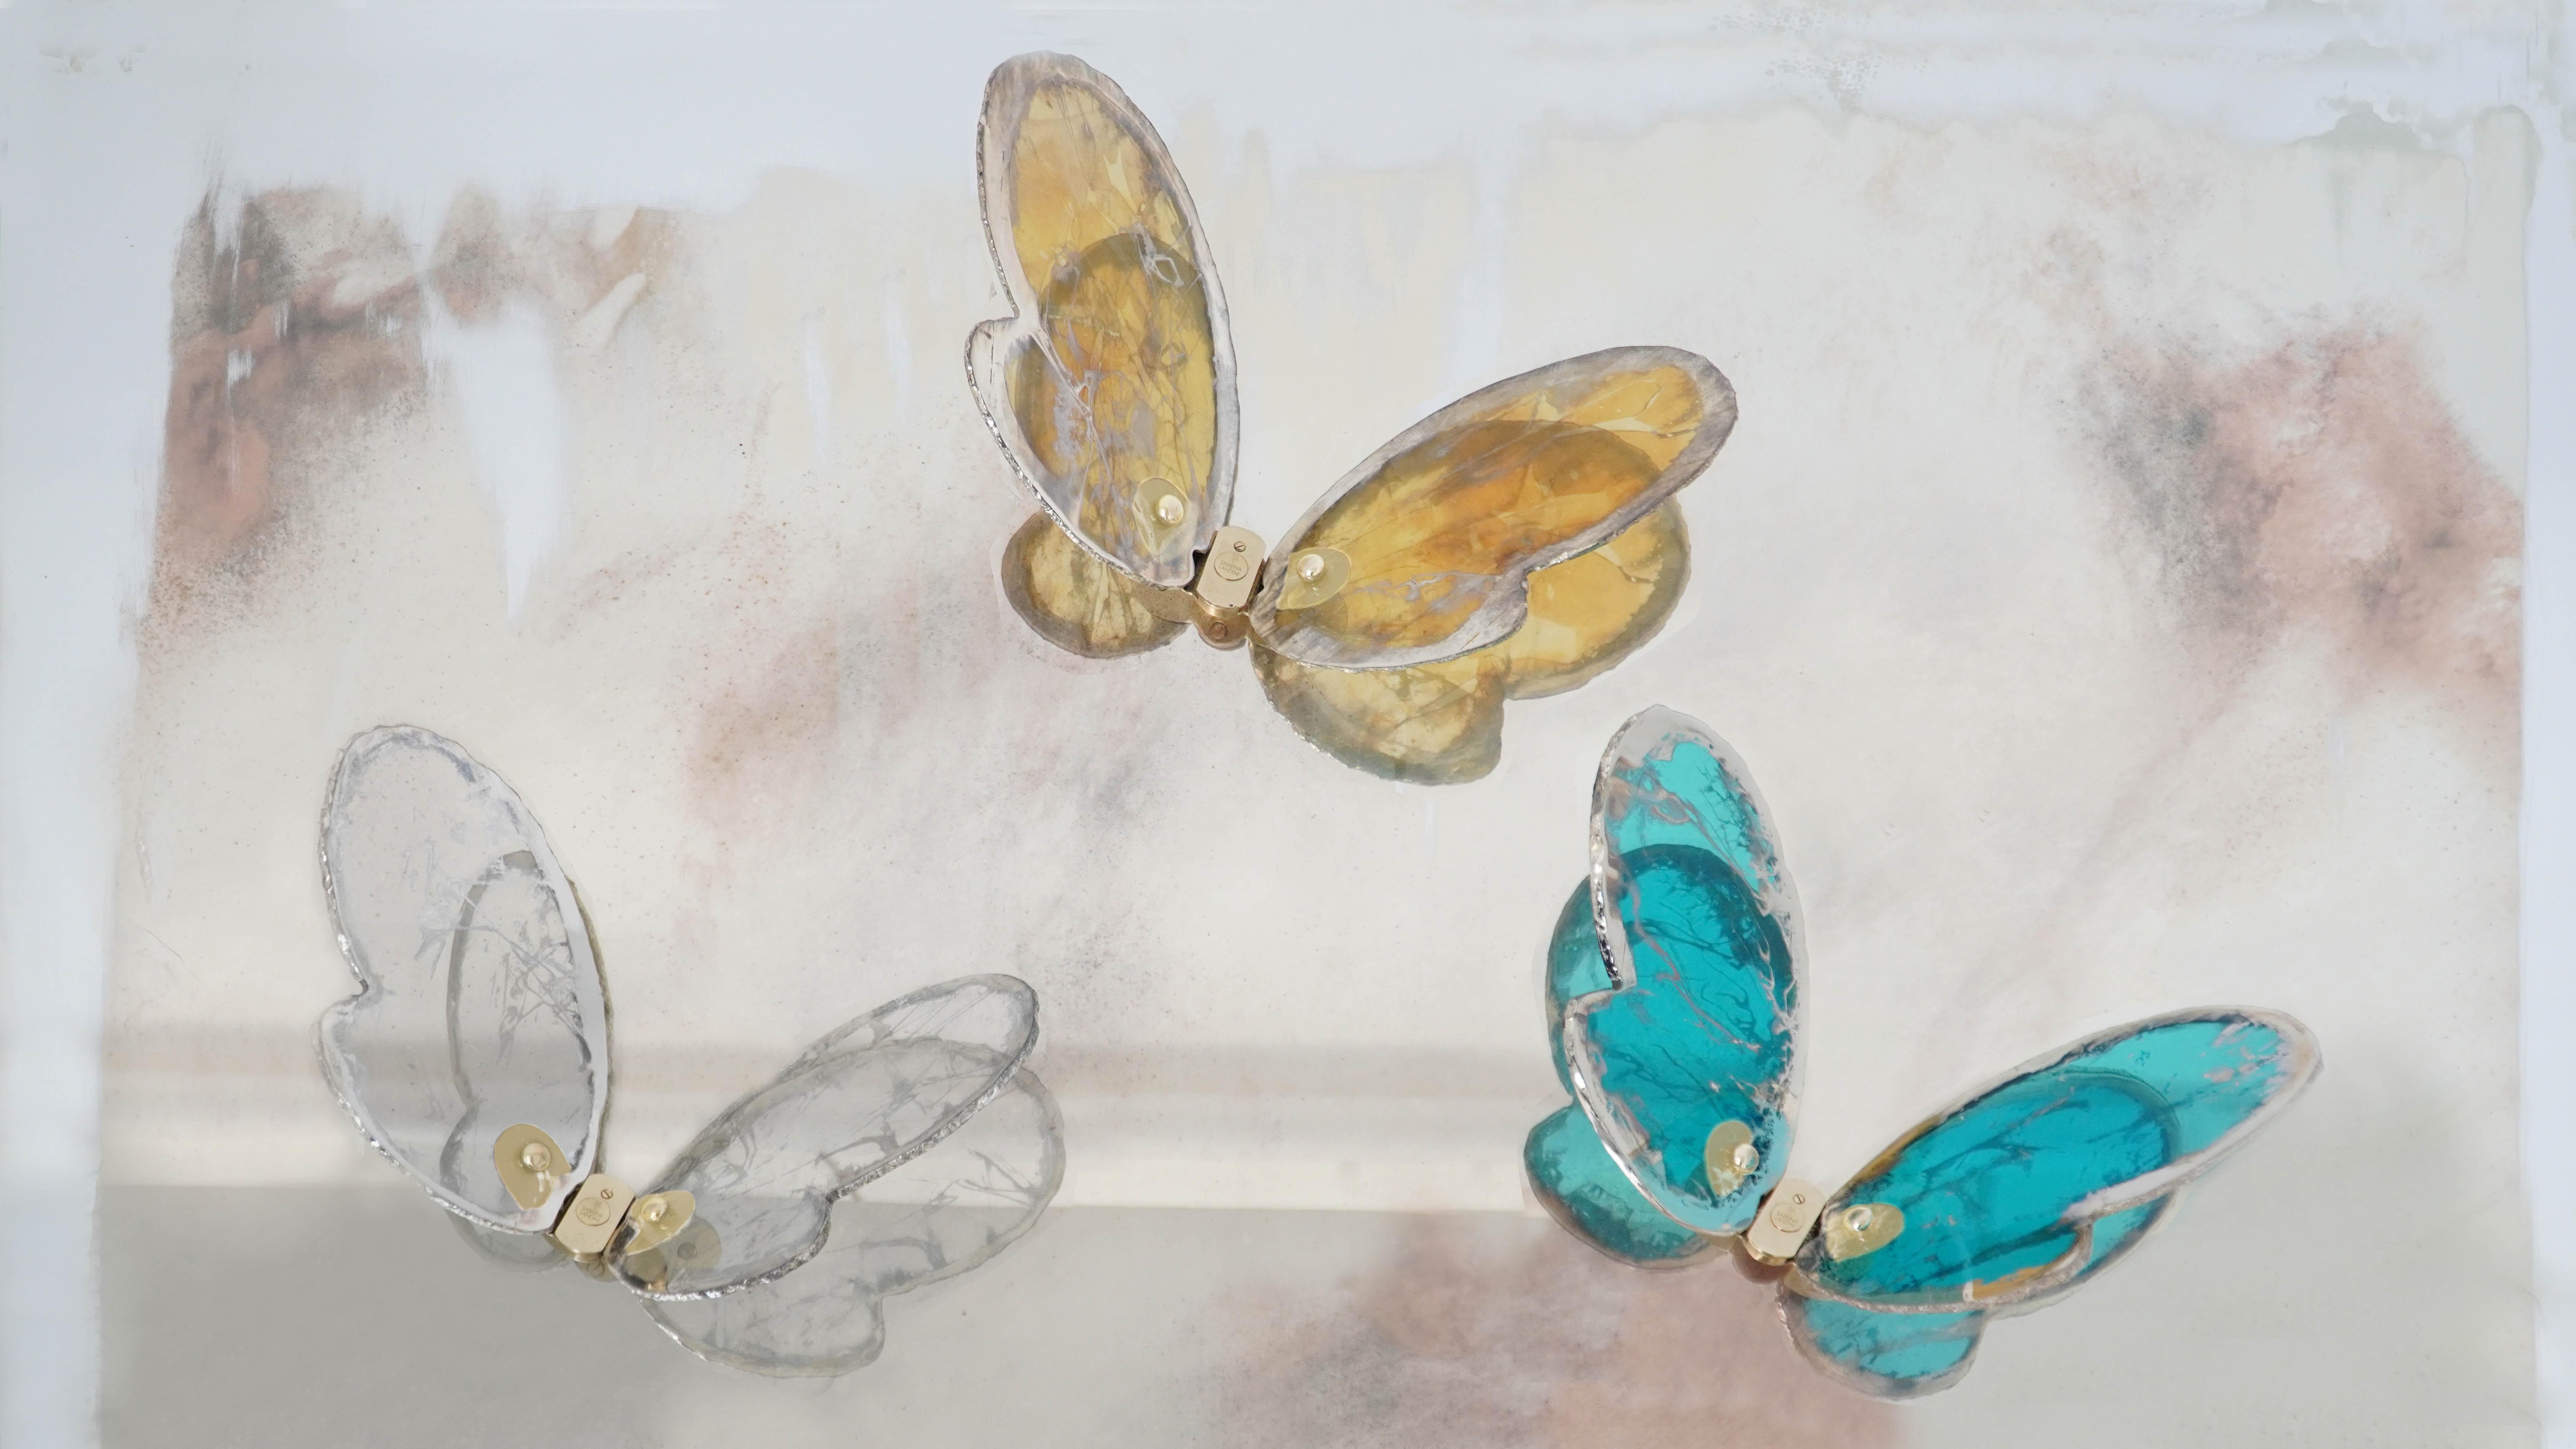 Butterfly Contemporary Wall Flight Sculpture, Art Silvered Glass, Sun Color In New Condition For Sale In Pietrasanta, IT